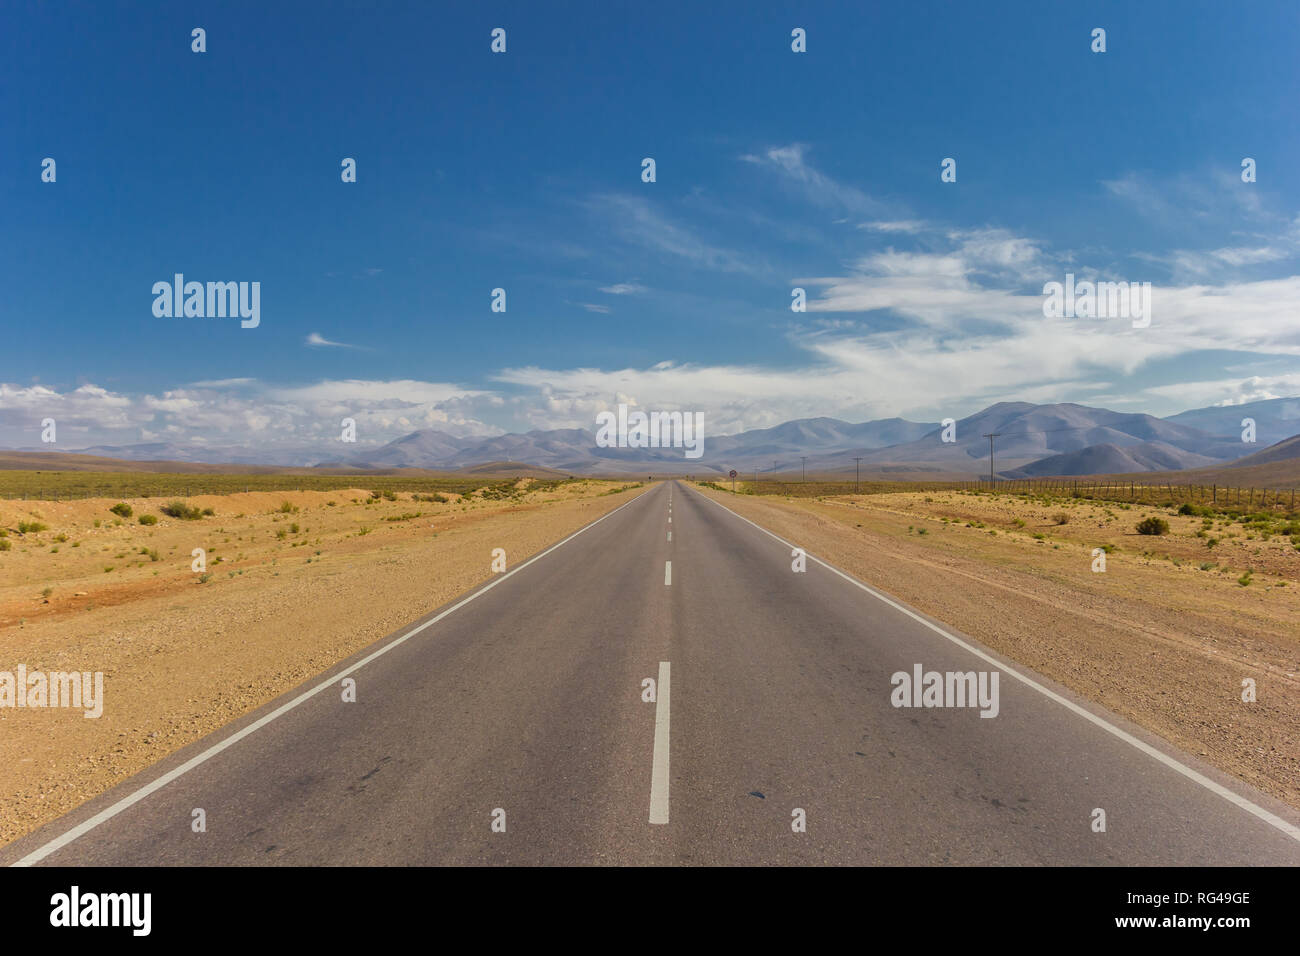 Road heading to the Andes mountain range in Argentina Stock Photo